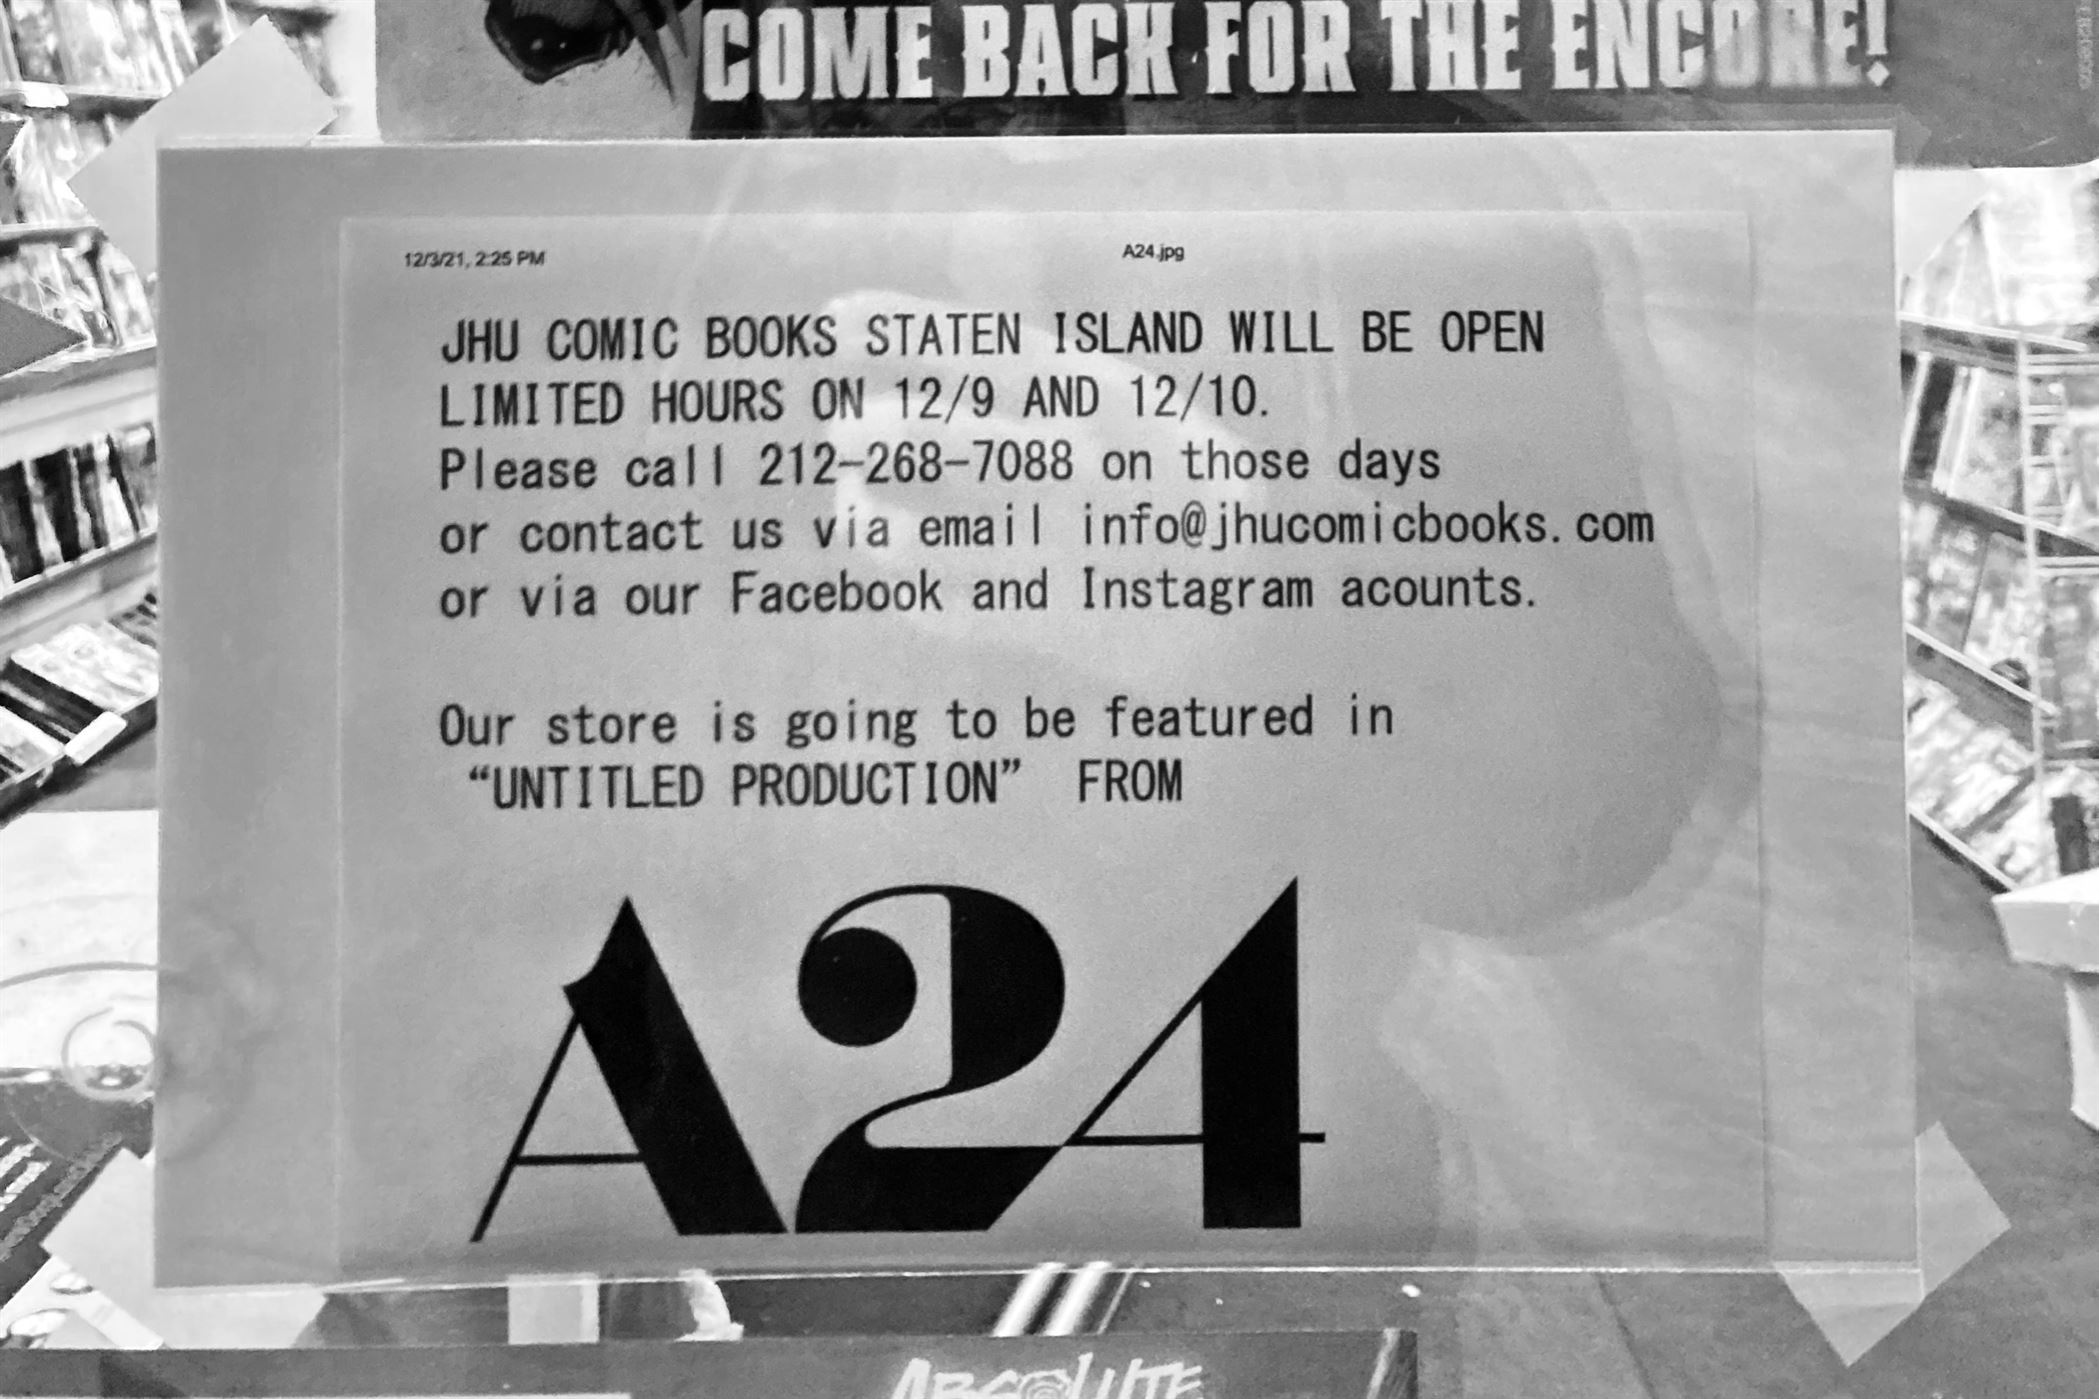 JHU Comic Books in Staten Island closed for "Funny Pages" production in December 2021. Photo courtesy of Shane Fleming.